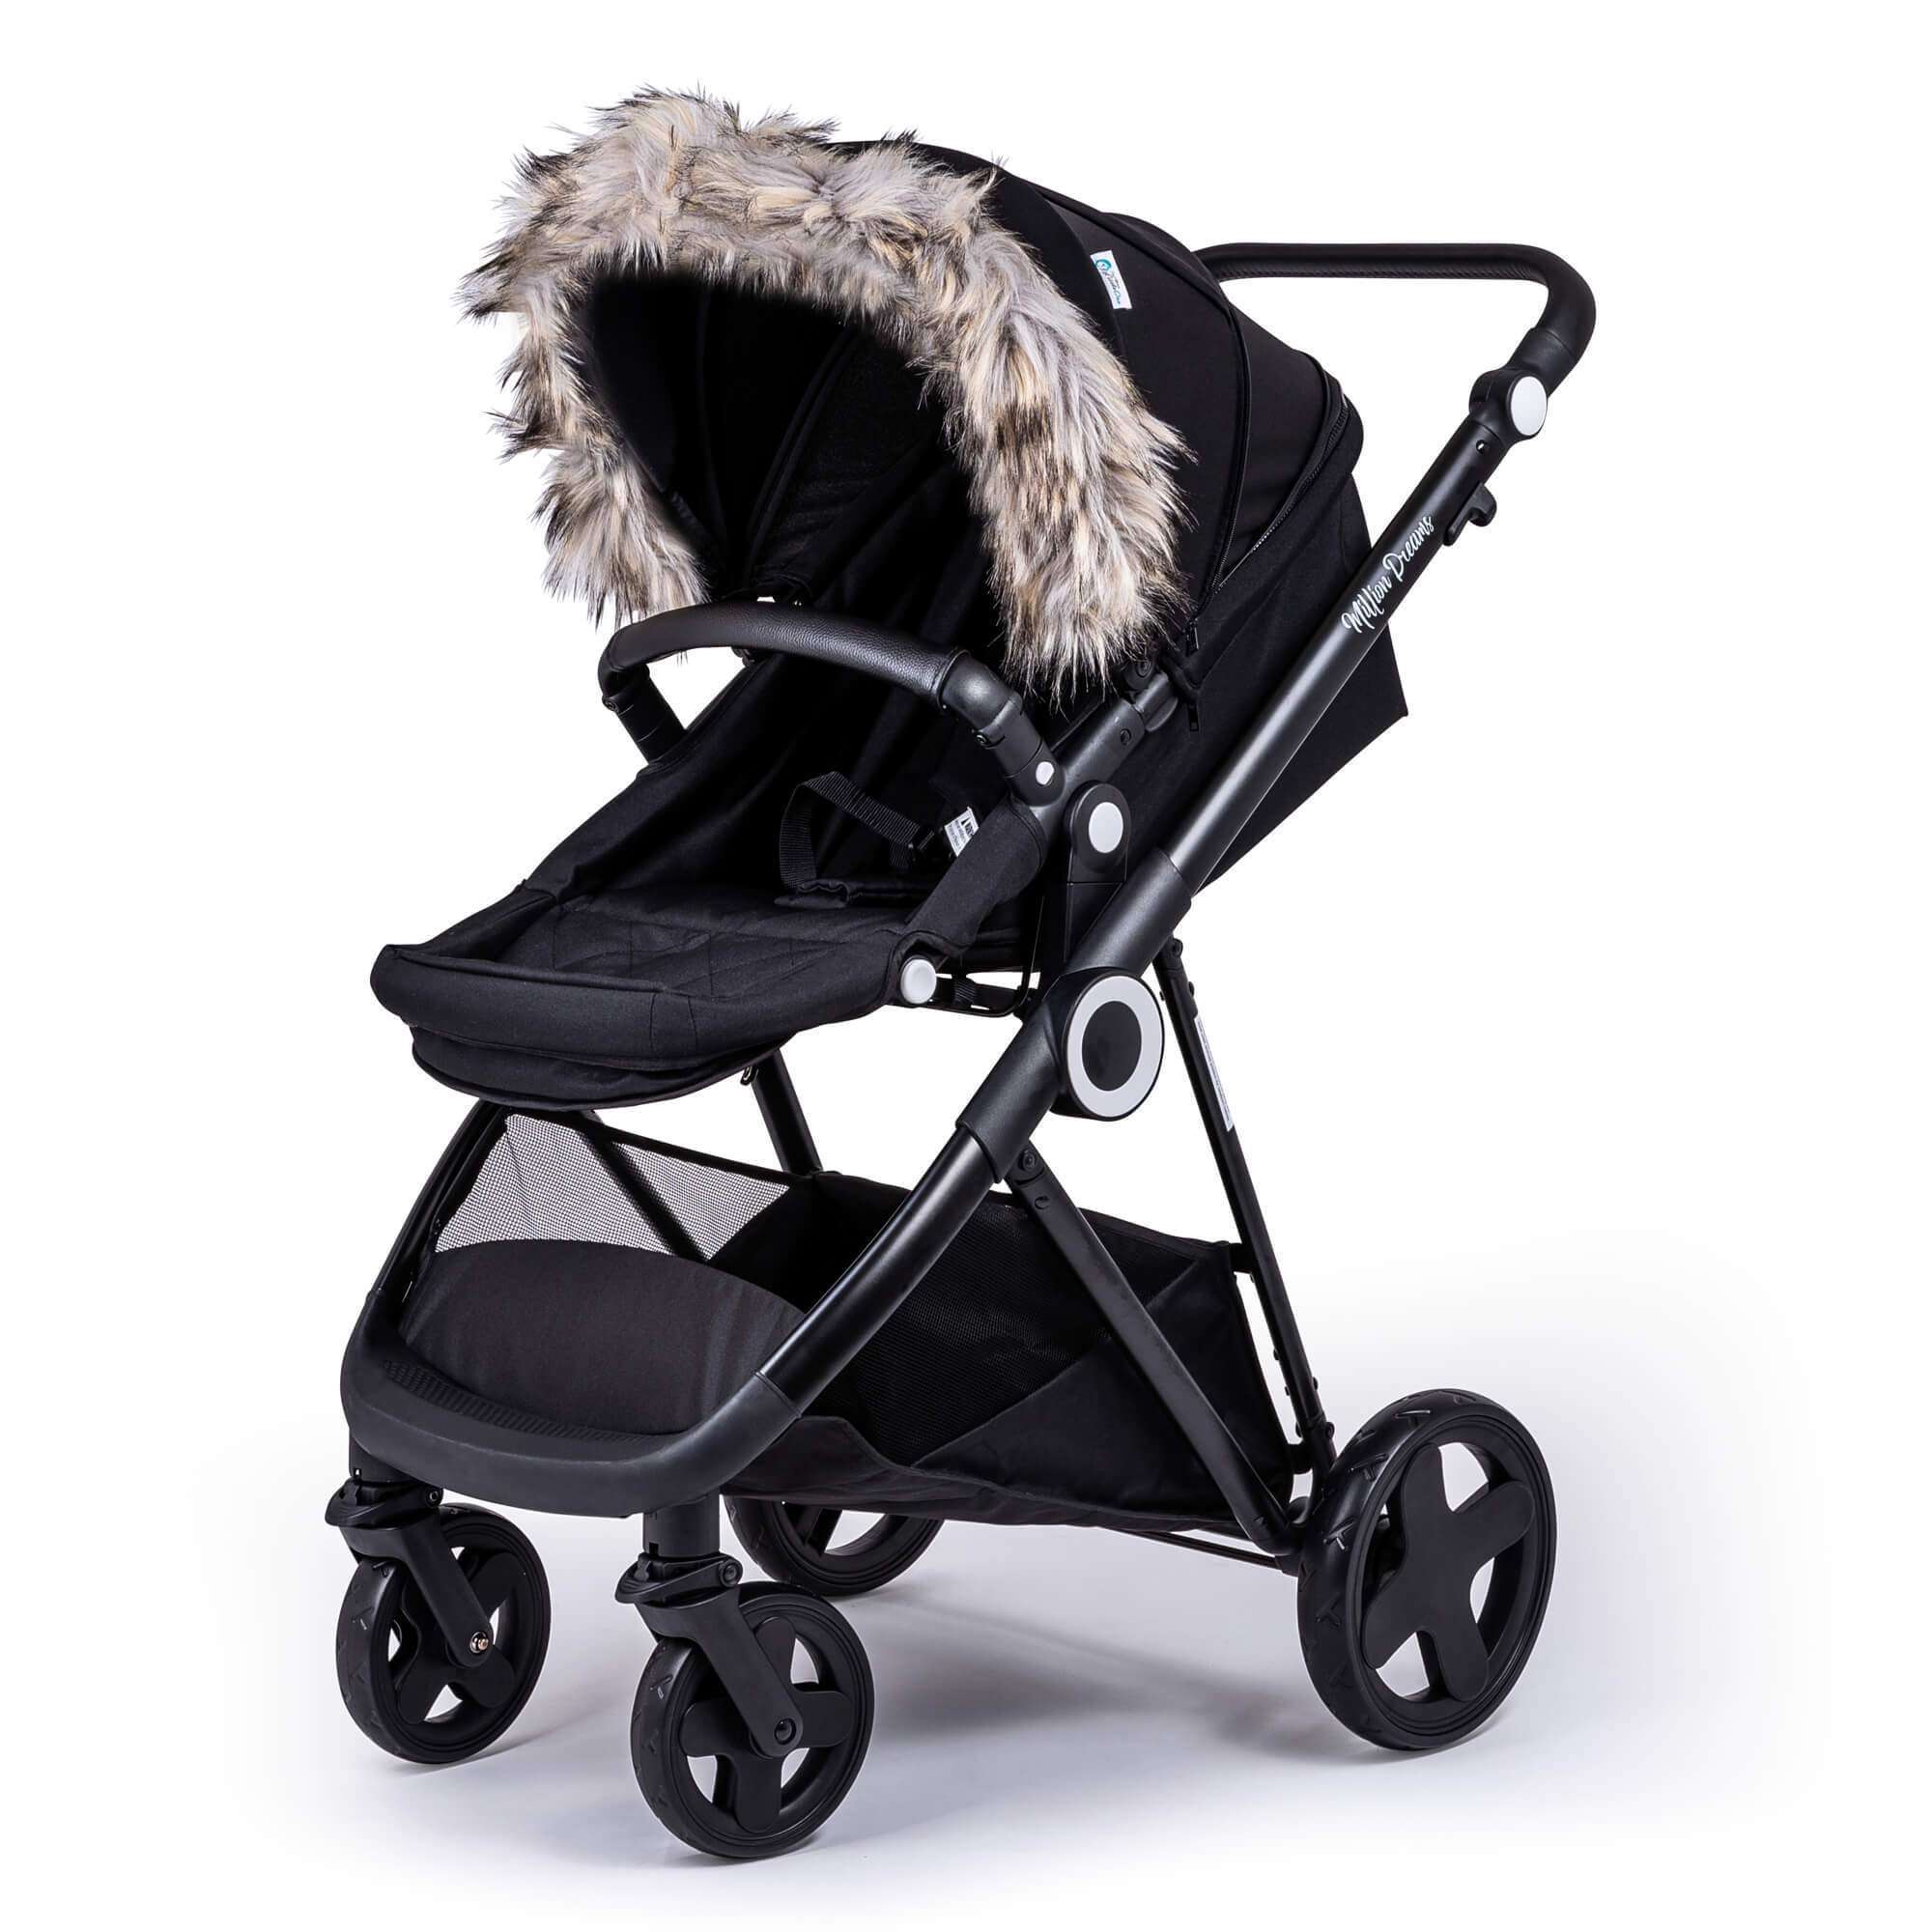 Pram Fur Hood Trim Attachment for Pushchair Compatible with Silver Cross - Light Grey / Fits All Models | For Your Little One